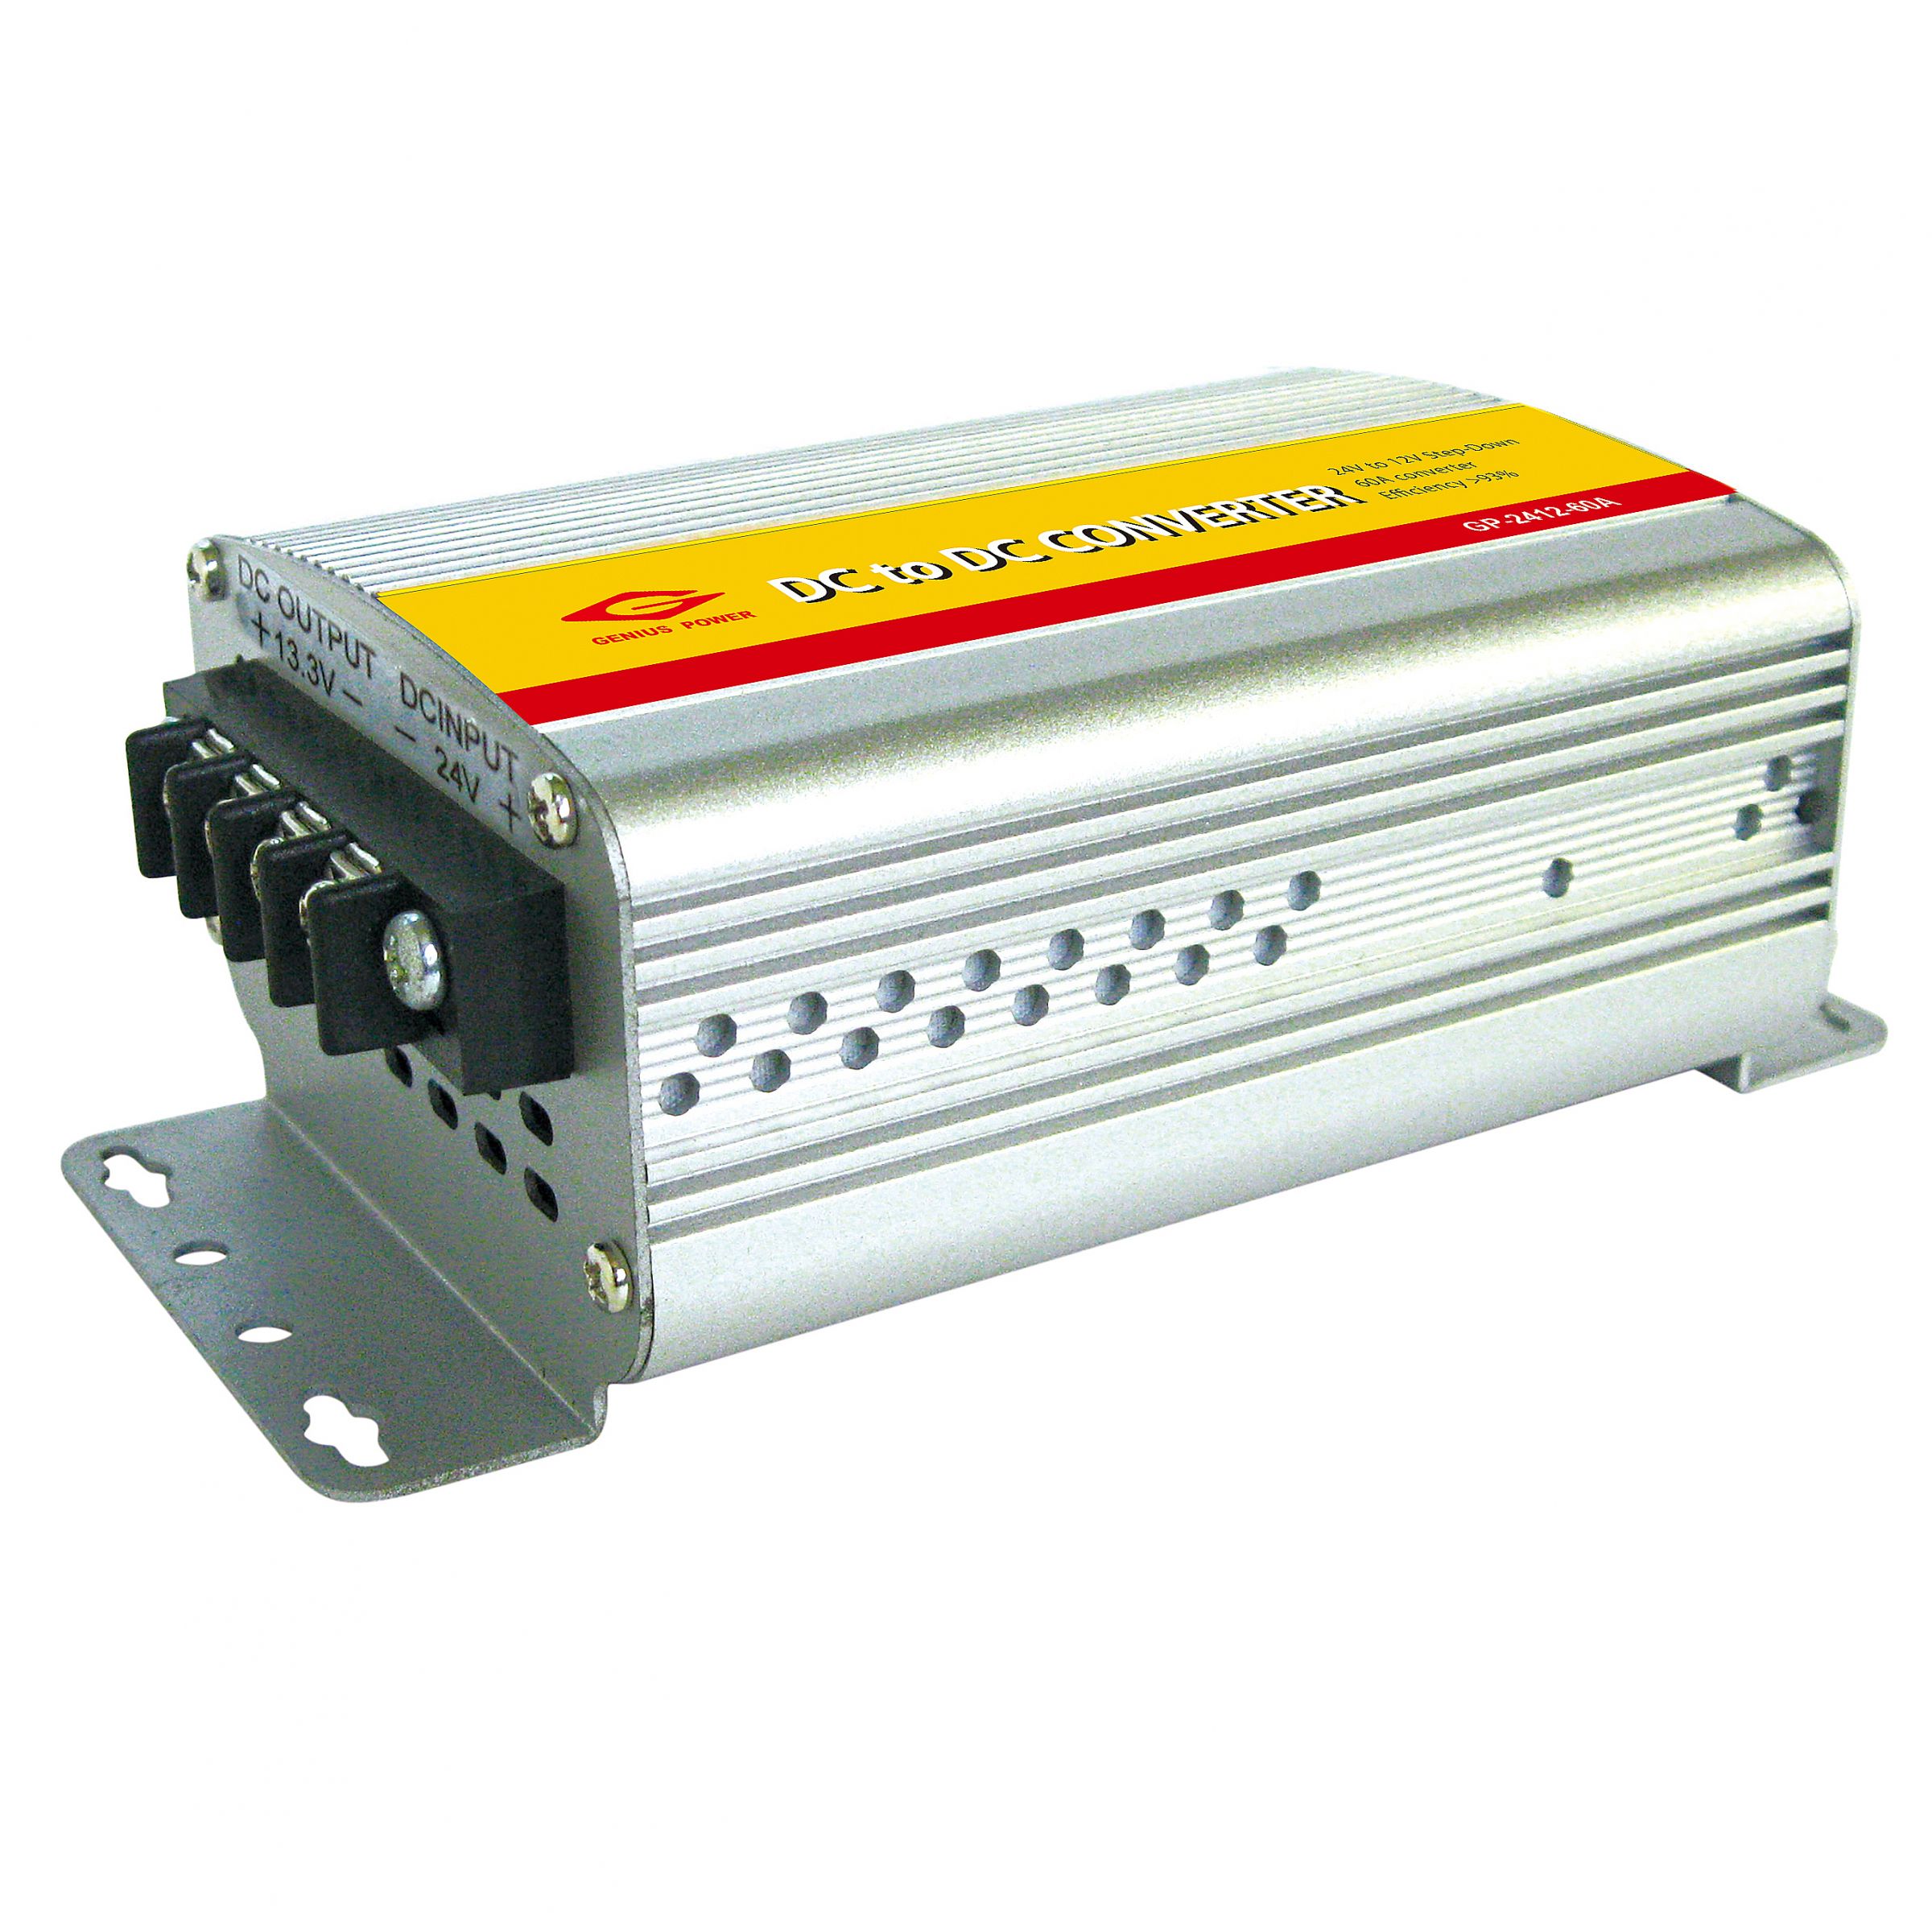 DC to DC 24V to 12V Power Converter, High-capacity DC to AC power inverter  suppliers